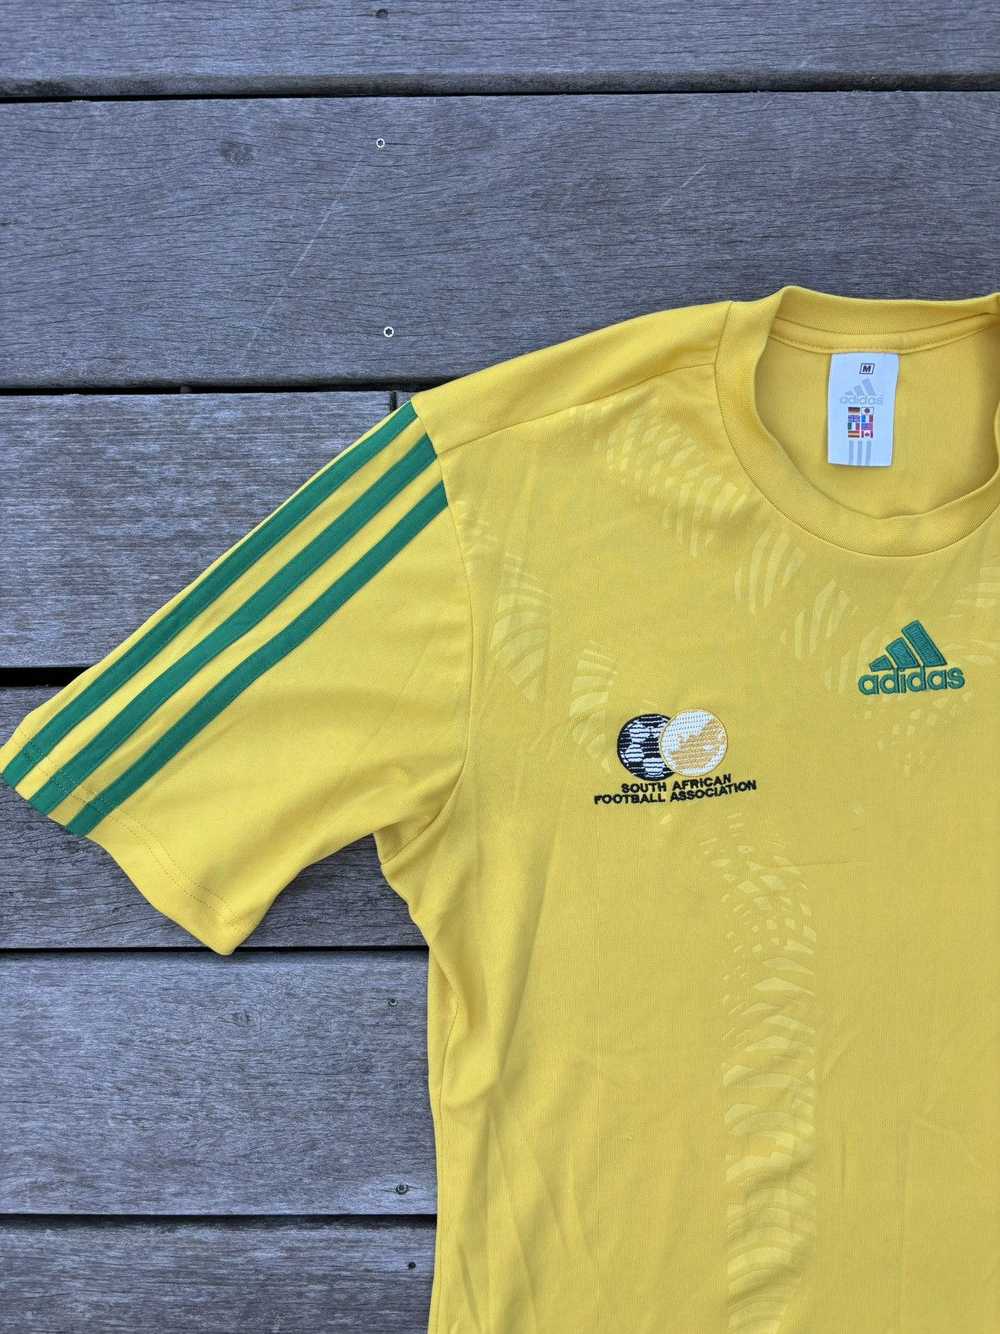 Adidas × Soccer Jersey × Streetwear South Africa … - image 3